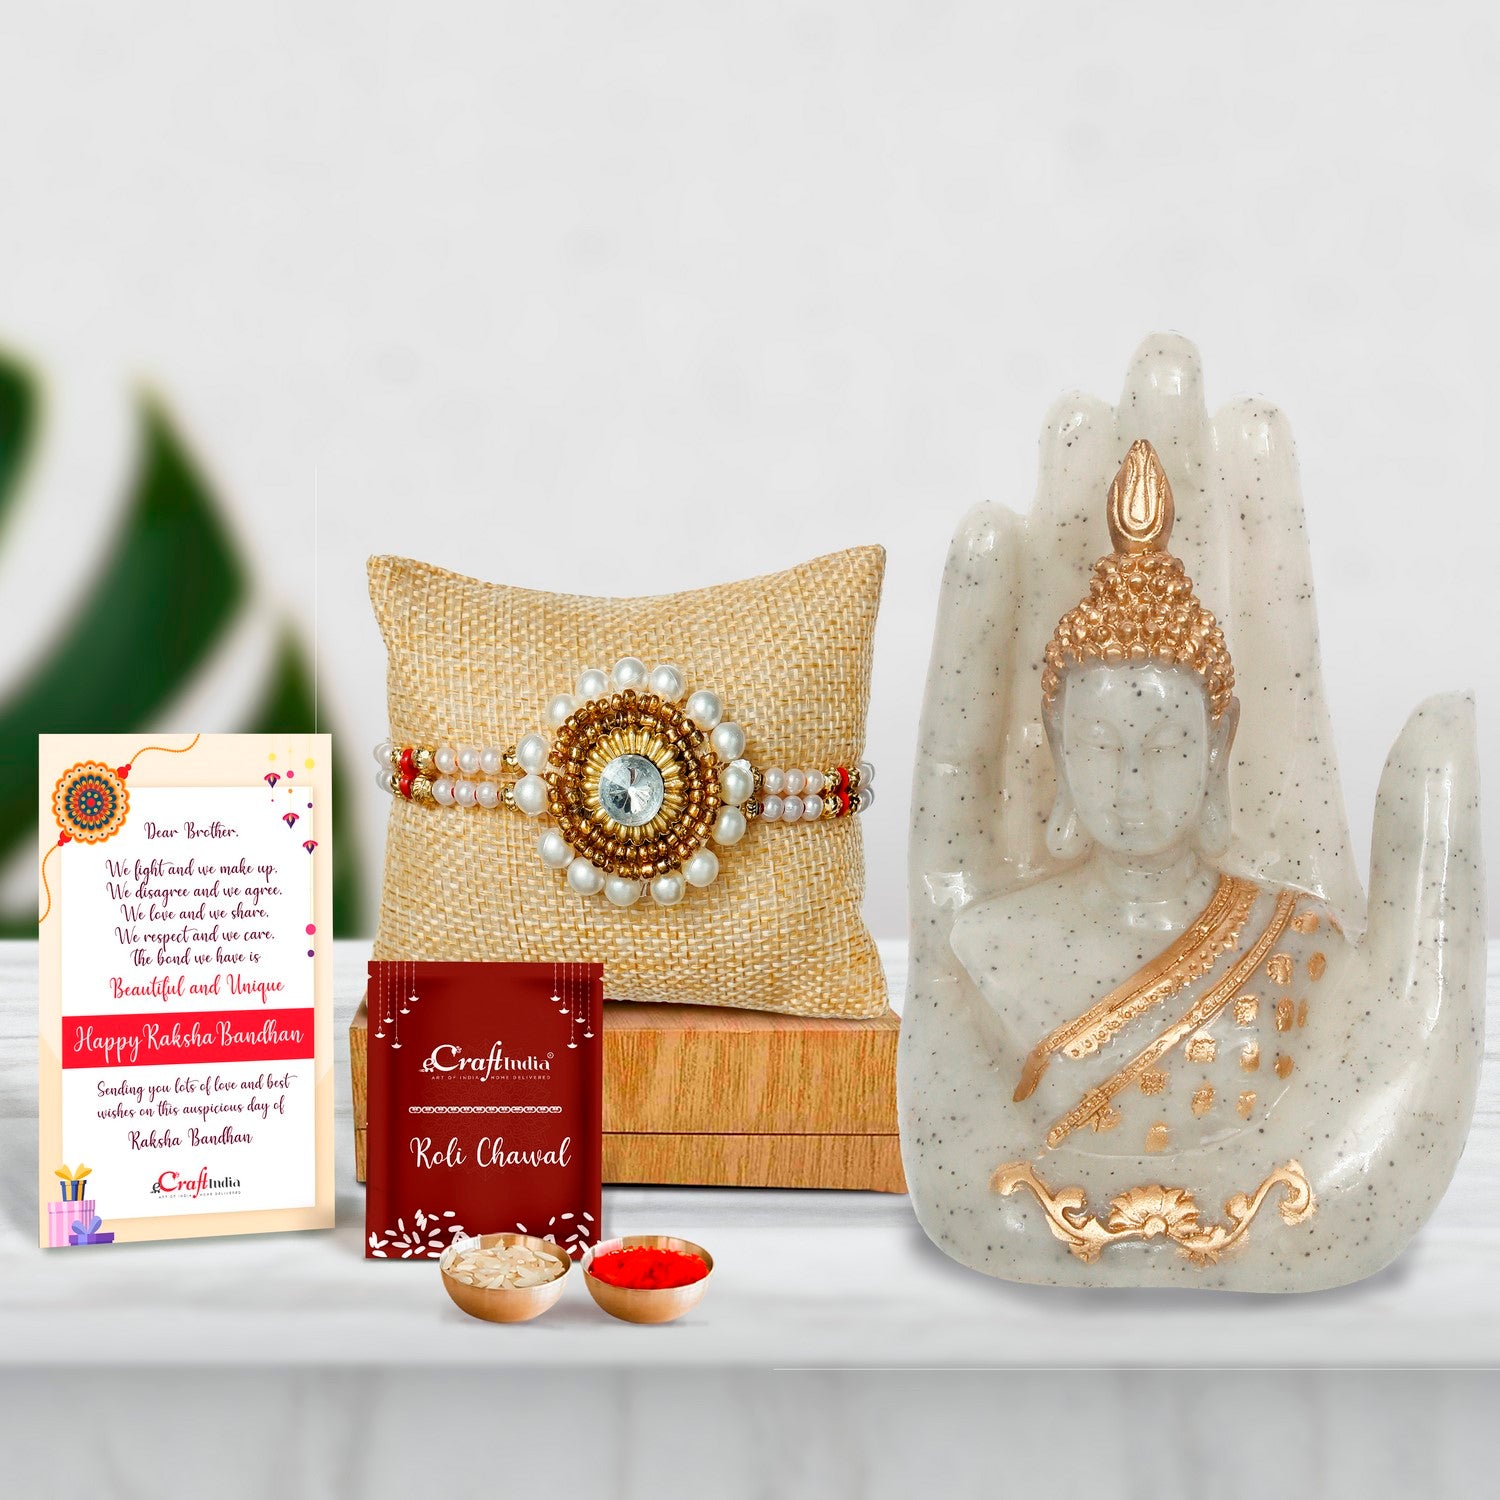 Designer Handcrafted Stone Pearl Rakhi with Golden Silver Handcrafted Palm Buddha Showpiece and Roli Chawal Pack, Best Wishes Greeting Card